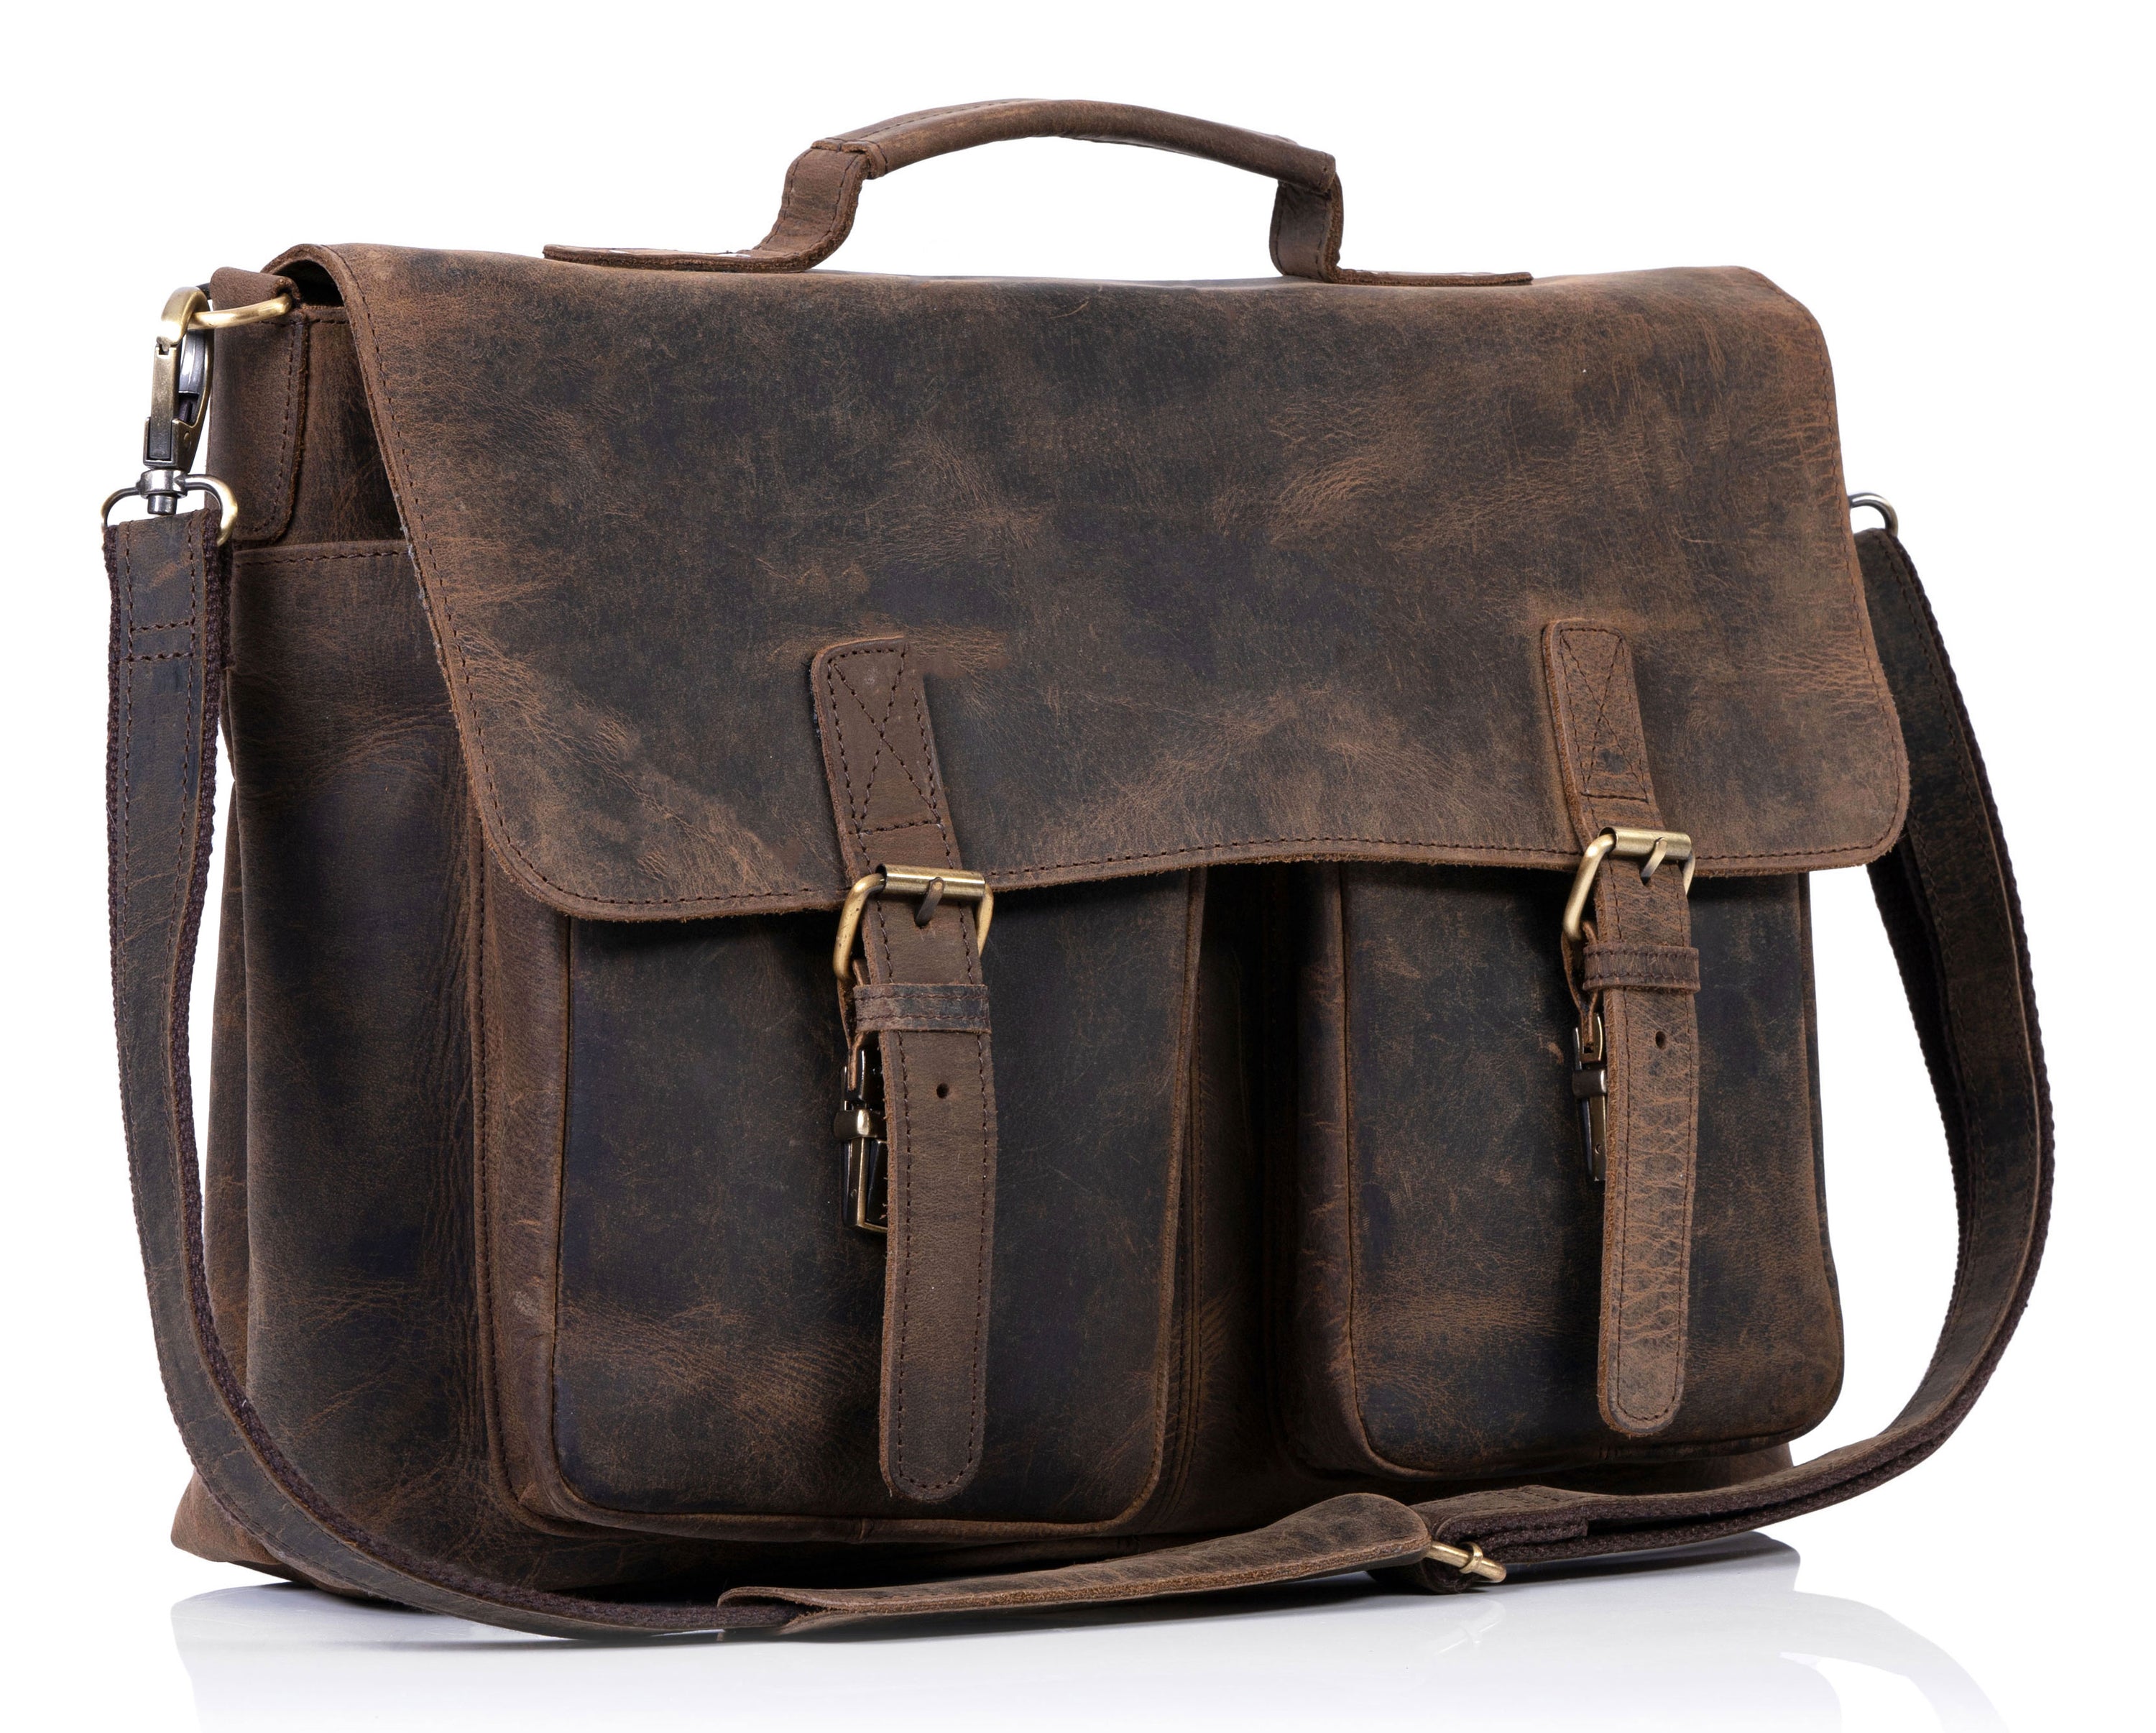  KomalC 16 Inch Leather briefcase Laptop Messenger Bags